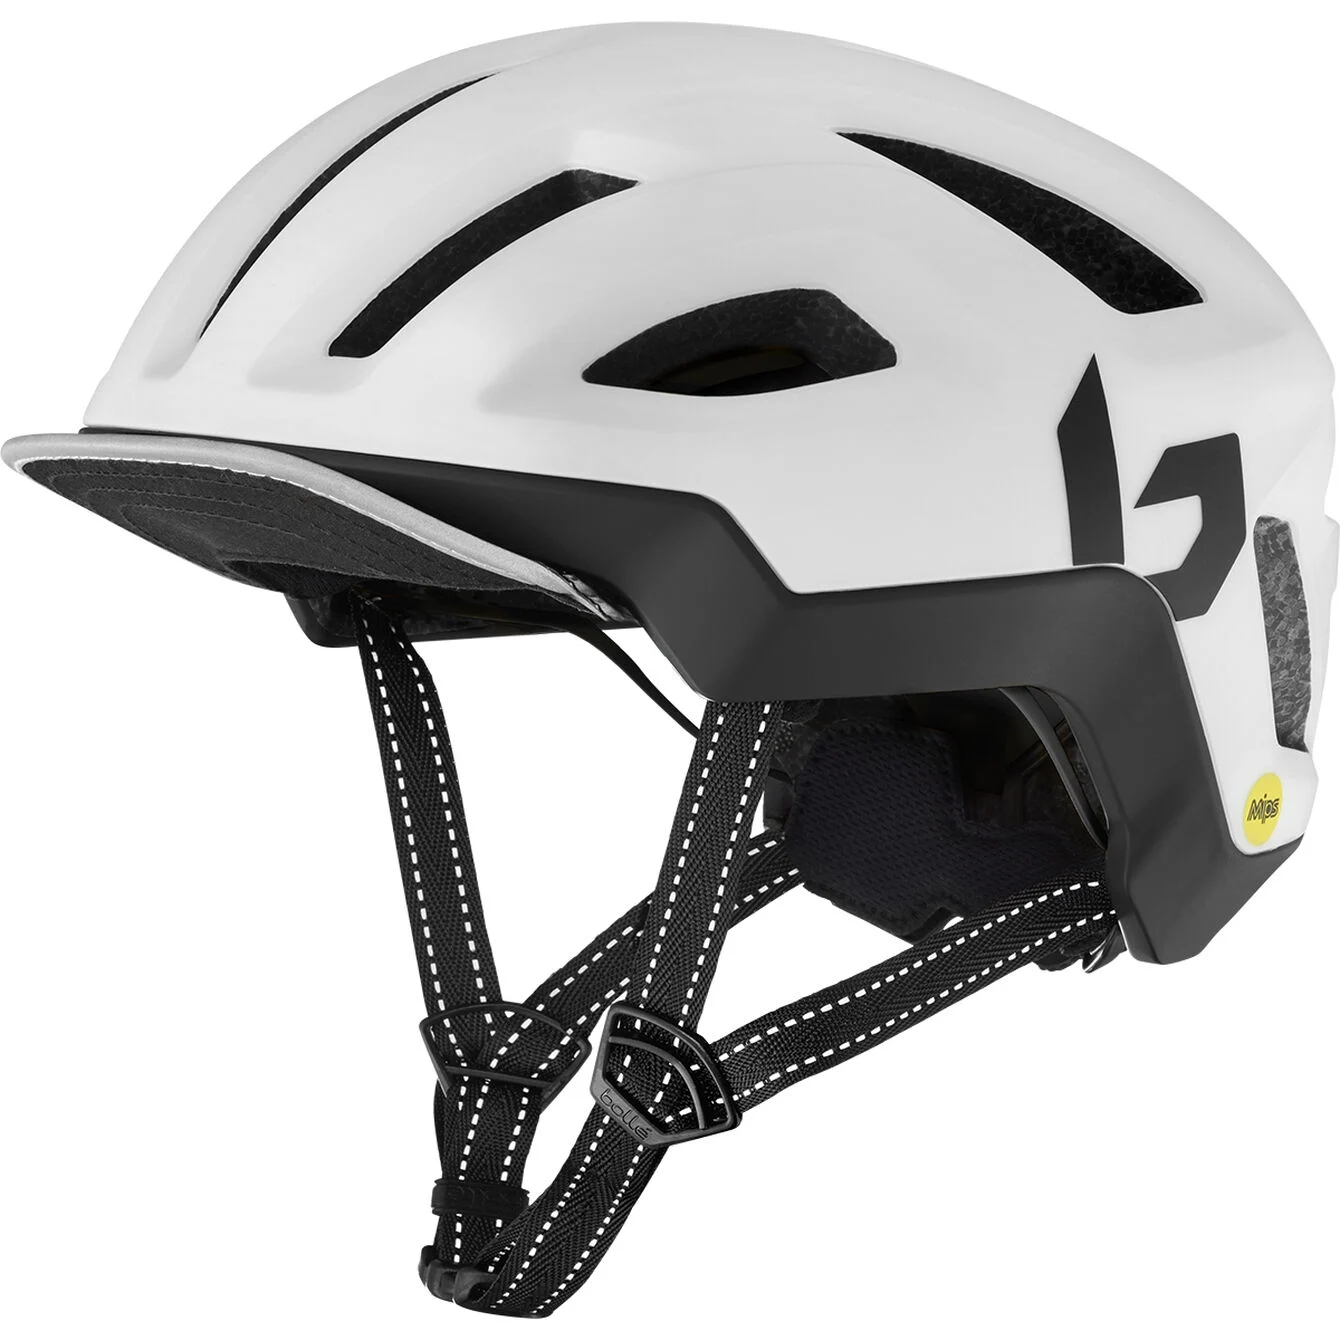 Picture of Bollé React MIPS Helmet - matte white